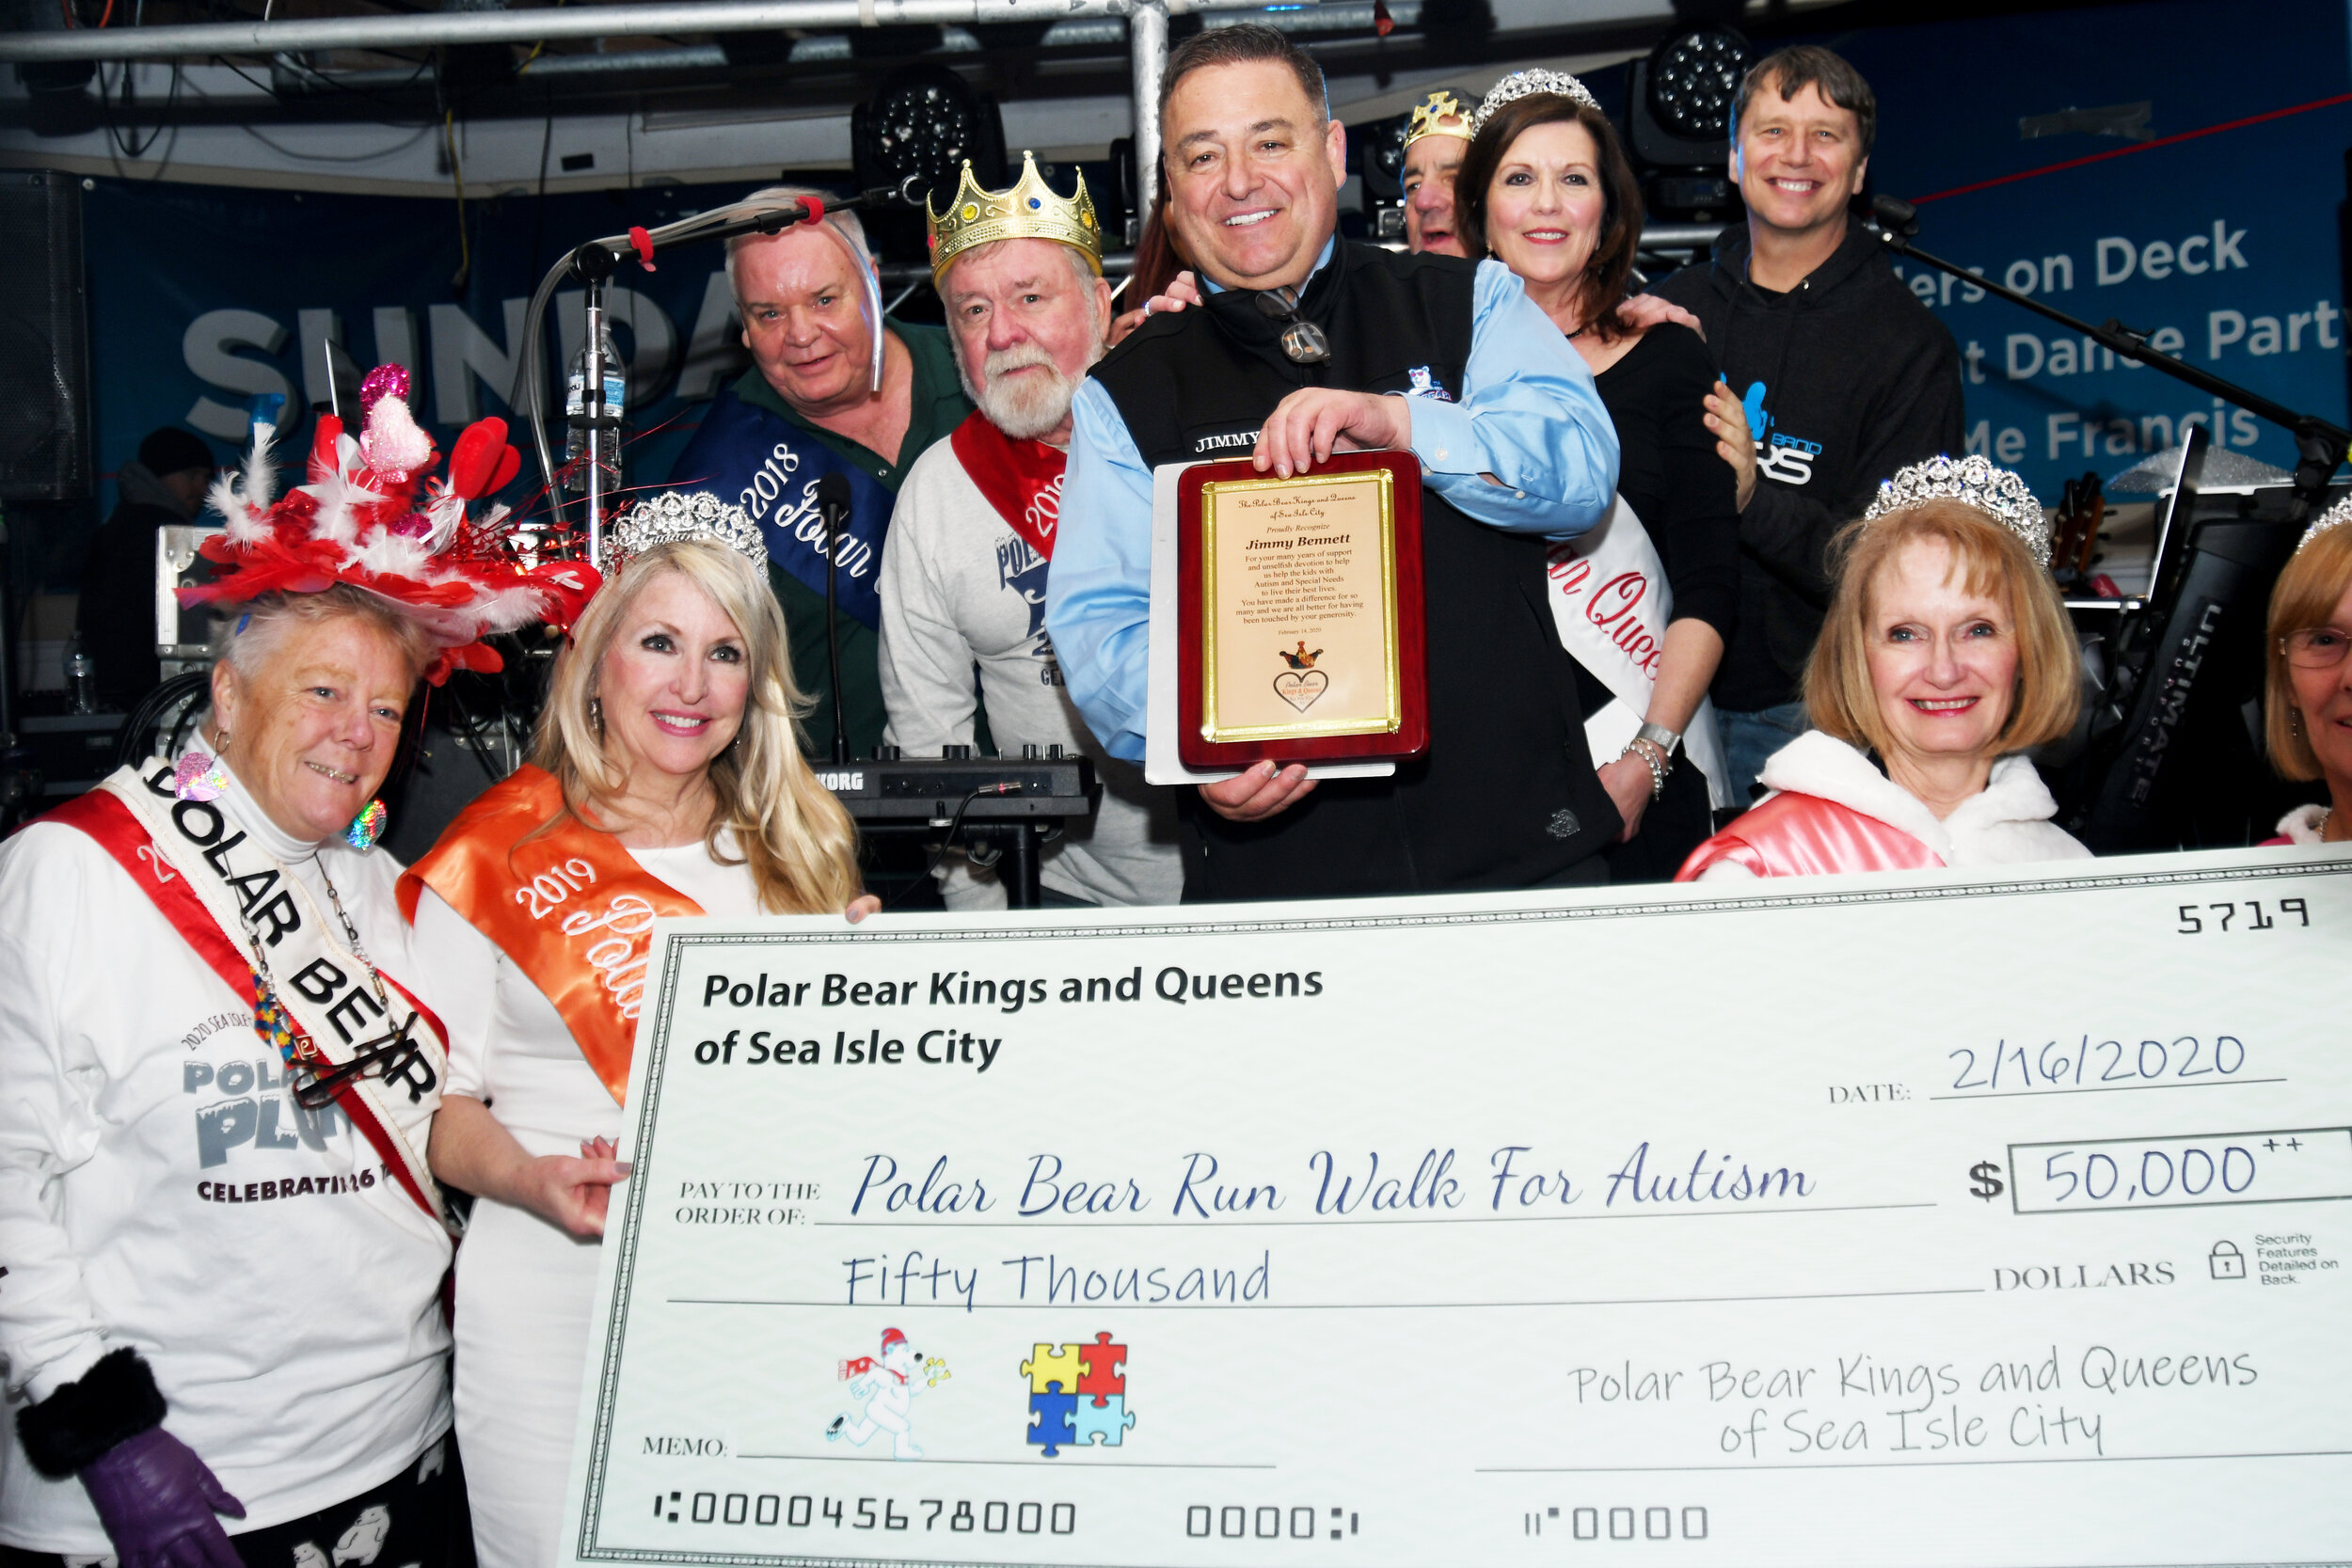 The Polar Bear Kings and Queens presented La Costa owner Jimmy Bennett with a plaque and unveiled their $50,000 donation to the Polar Bear Run/Walk for Autism.